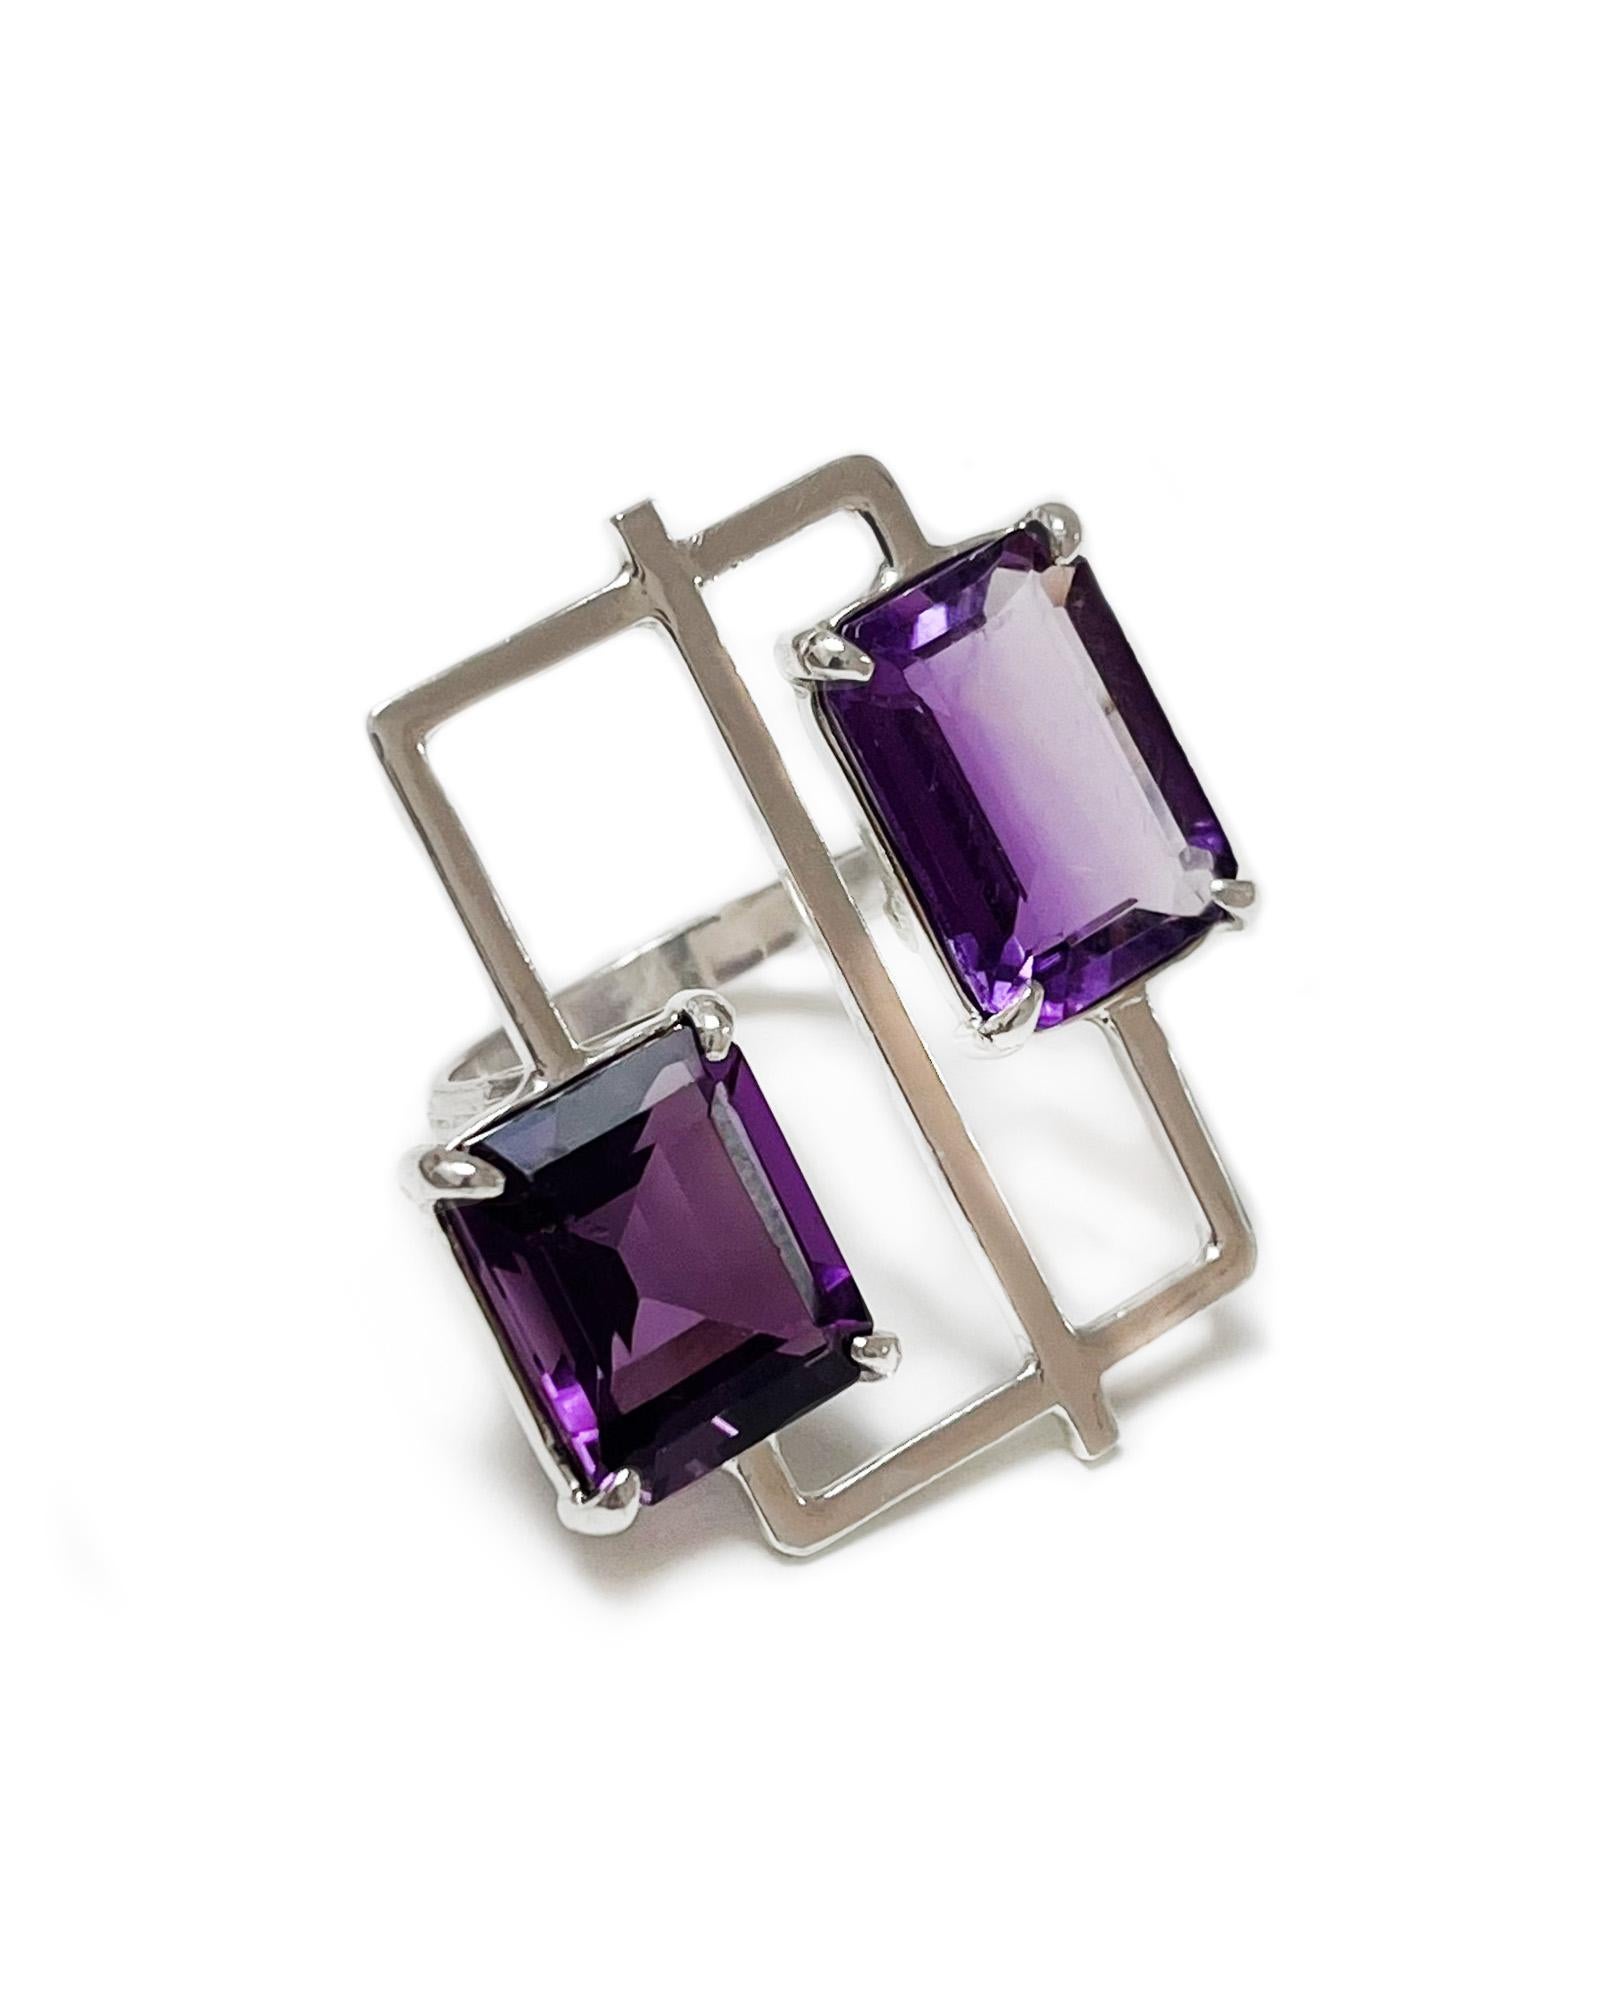 For Sale:  Cubist Ring in Amethyst and Sterling Silver 3